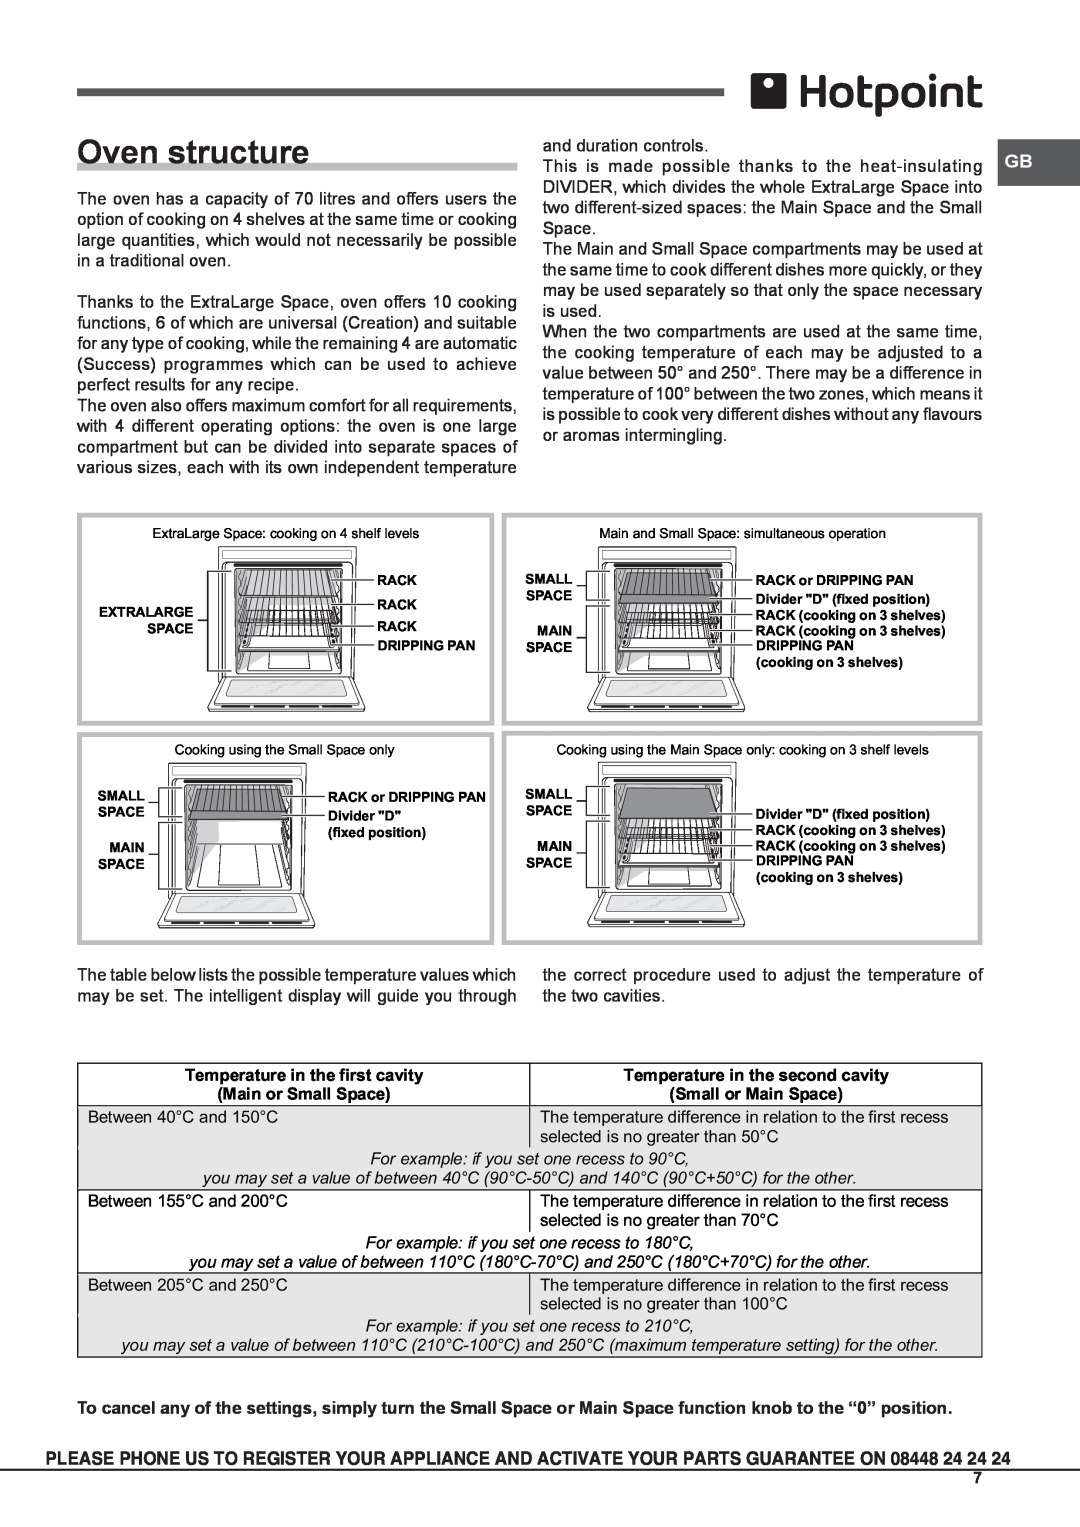 Hotpoint OS 897D P /HP S, OS 897D P IX /HP S manual Oven structure 